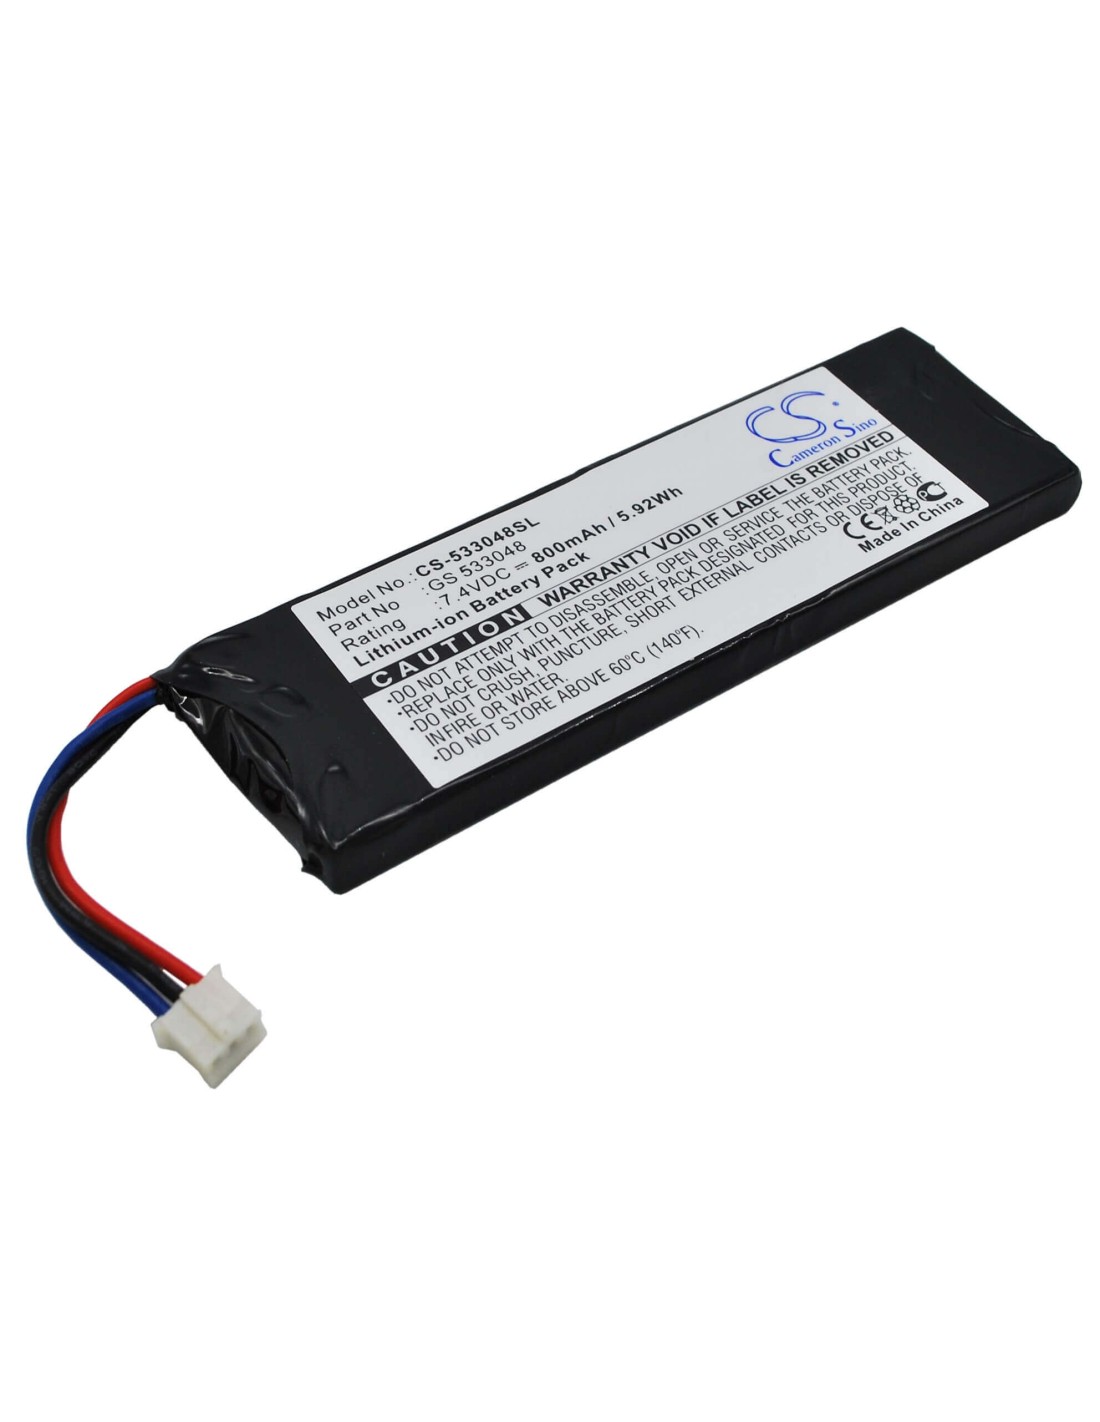 Battery for Sonstige X Drive Mp3 Player 7.4V, 800mAh - 5.92Wh